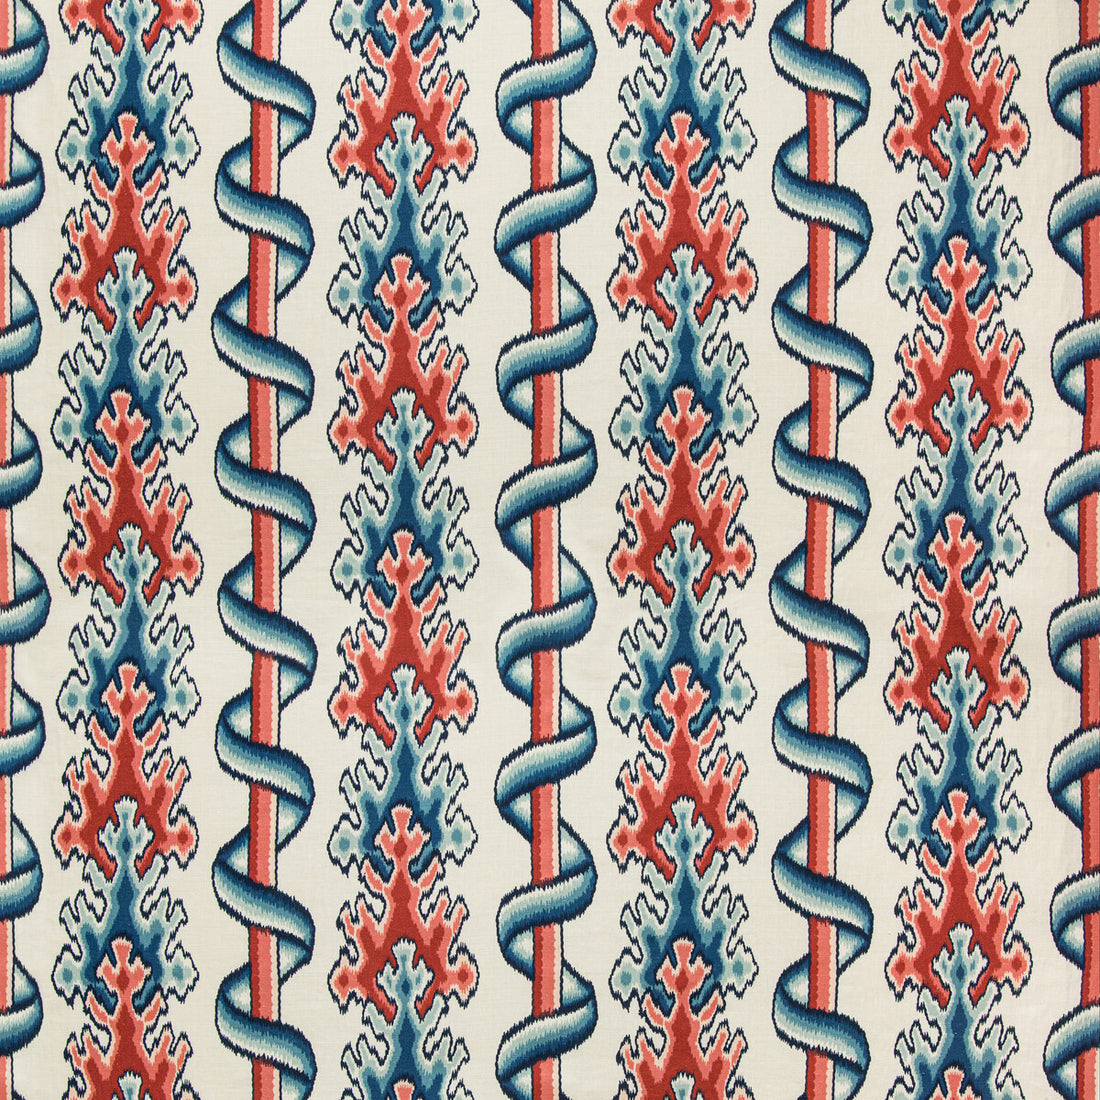 Montguyon Print fabric in blue/red color - pattern 8020102.519.0 - by Brunschwig &amp; Fils in the Grand Bazaar collection